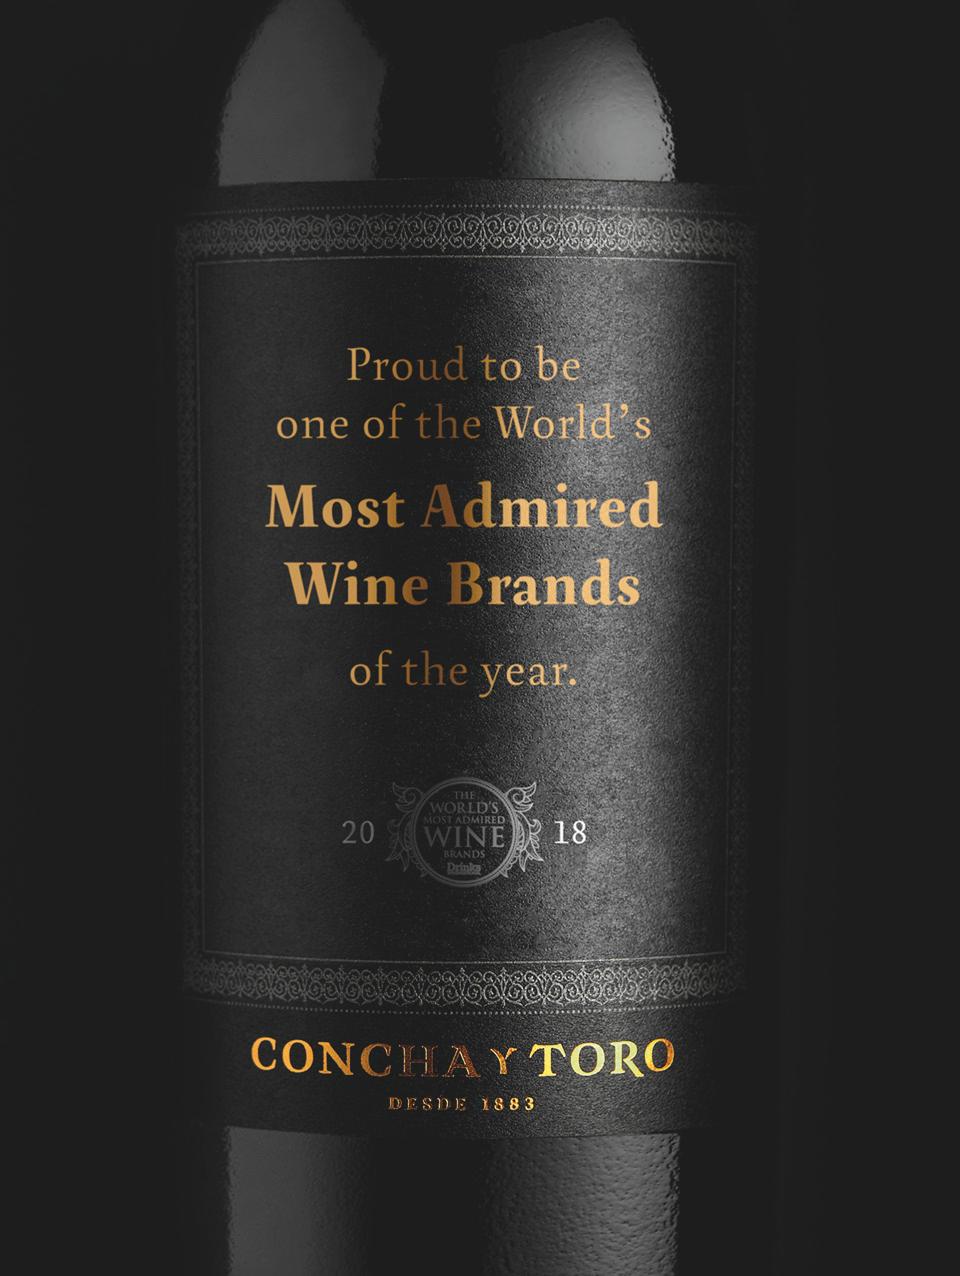 VIÑA CONCHA Y TORO REINFORCES ITS PREMIUM WINE CATEGORY With a strategy that responds to the new challenges of a dynamic and competitive environment, aimed at sustaining its growth in value and